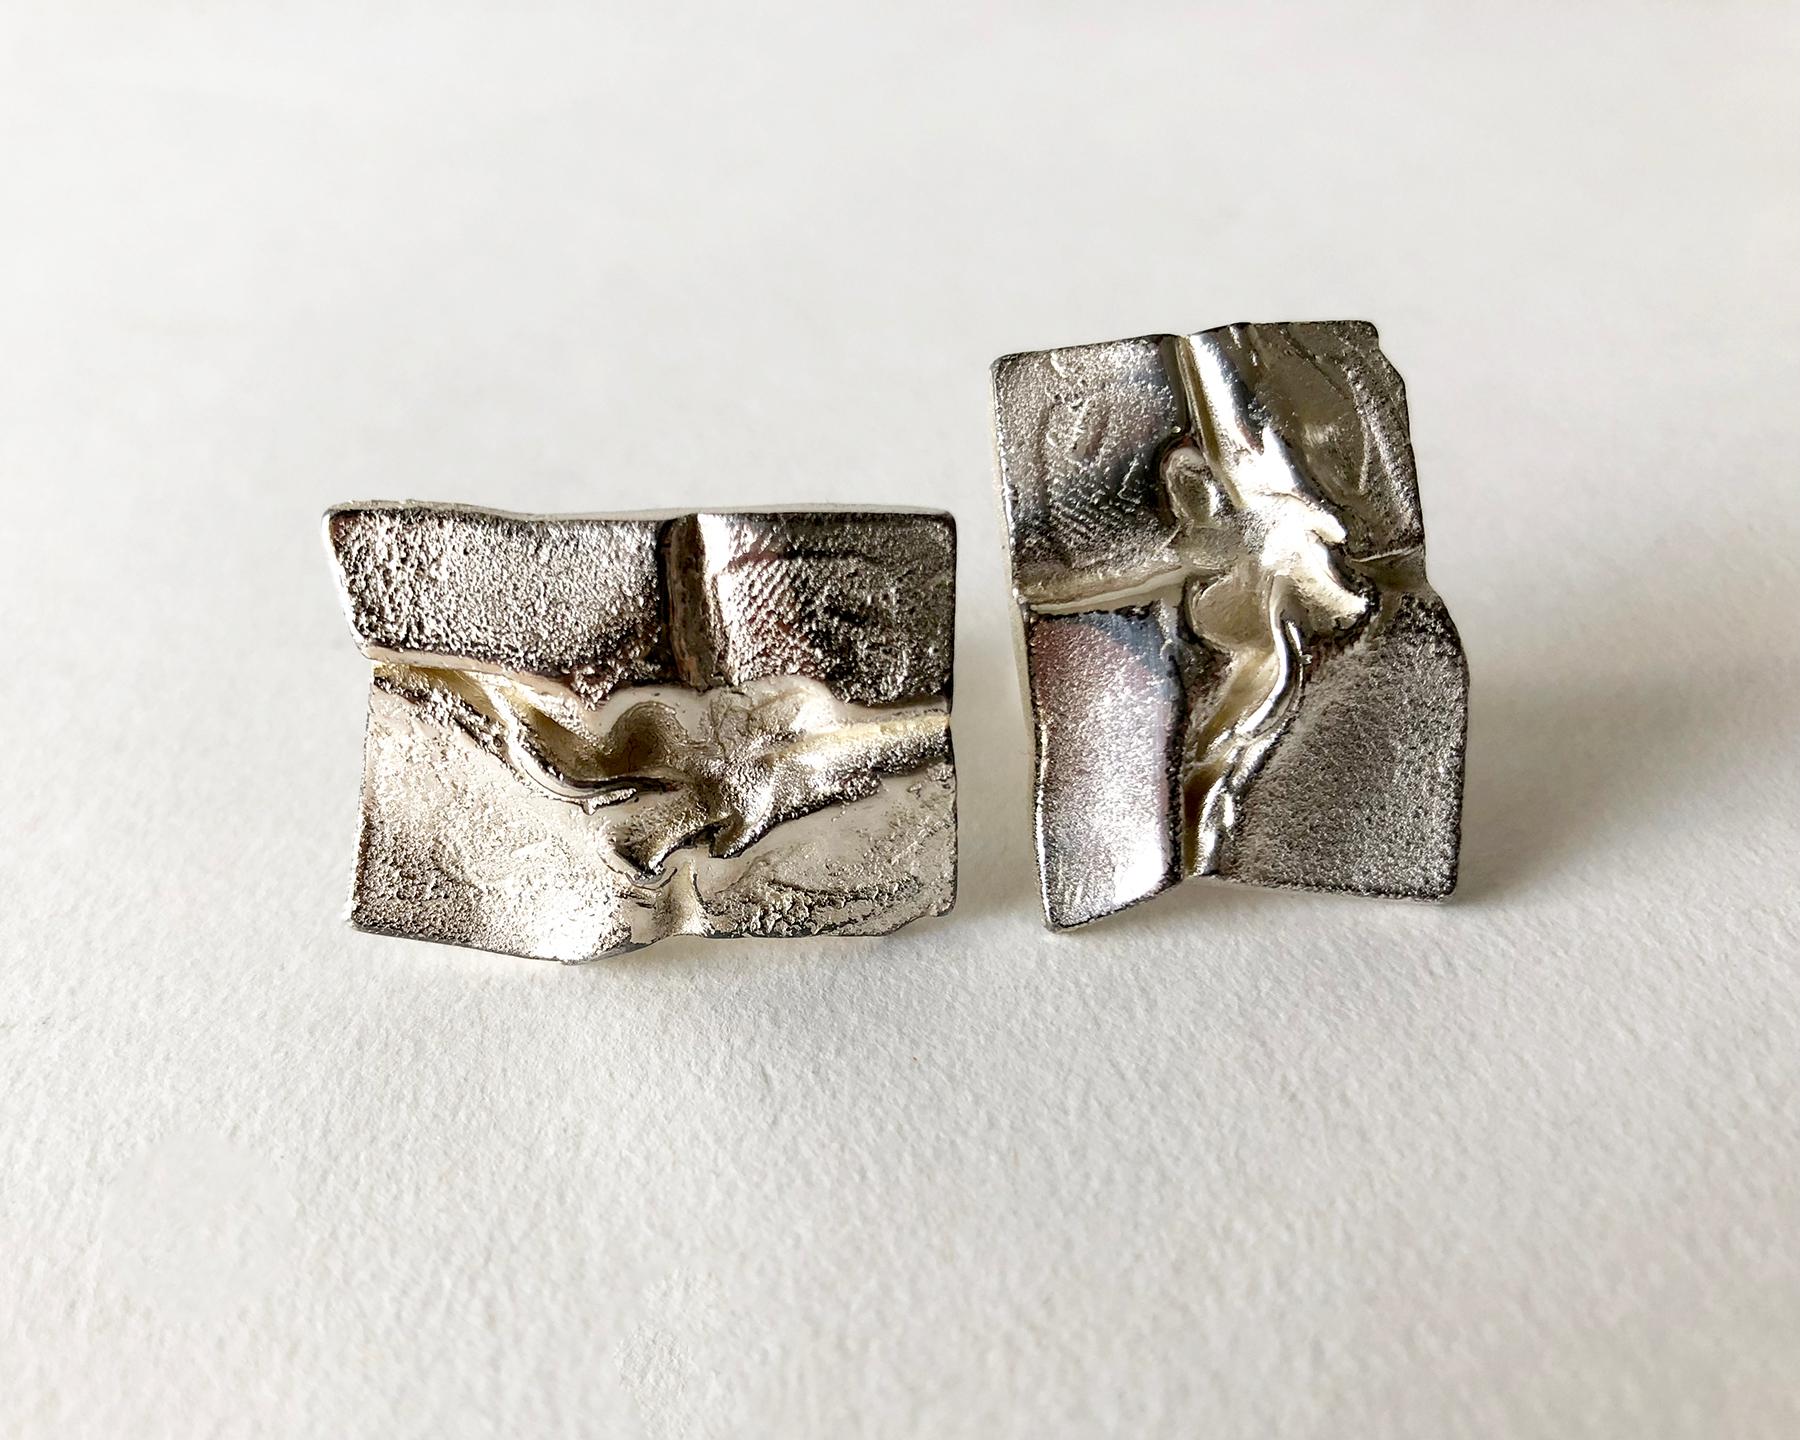 Sterling silver cufflinks created by Master sculptor and jeweler Bjorn Weckstrom of Finland.  Cufflinks are signed with the Lapponia hallmark, S7 (1971), Sterling, Finland, BW.  Suitable for a man or woman.  In very good vintage condition.